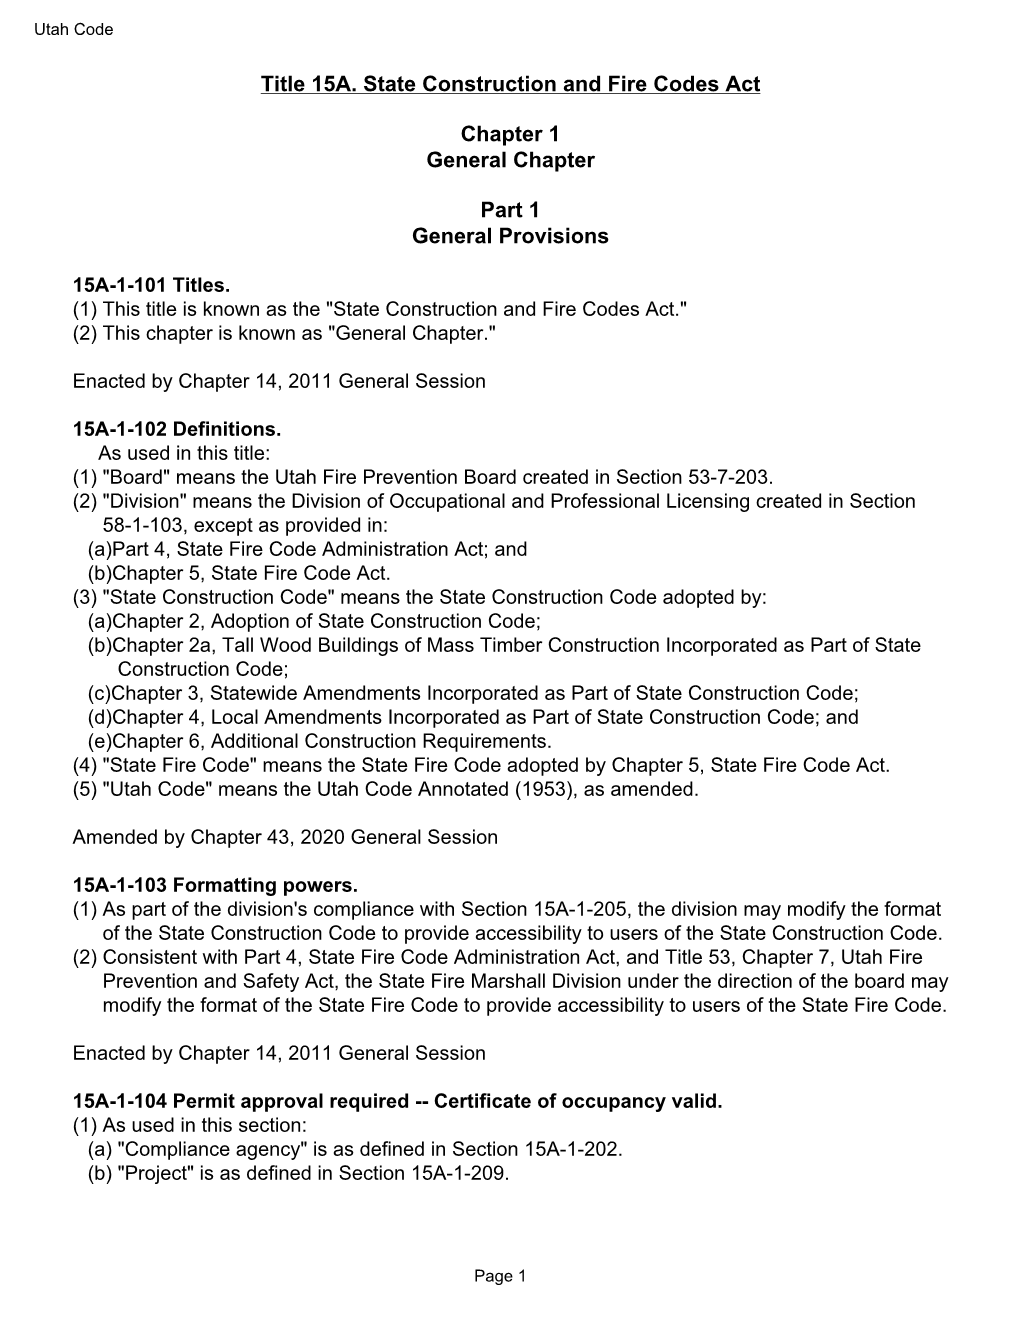 Title 15A. State Construction and Fire Codes Act Chapter 1 General